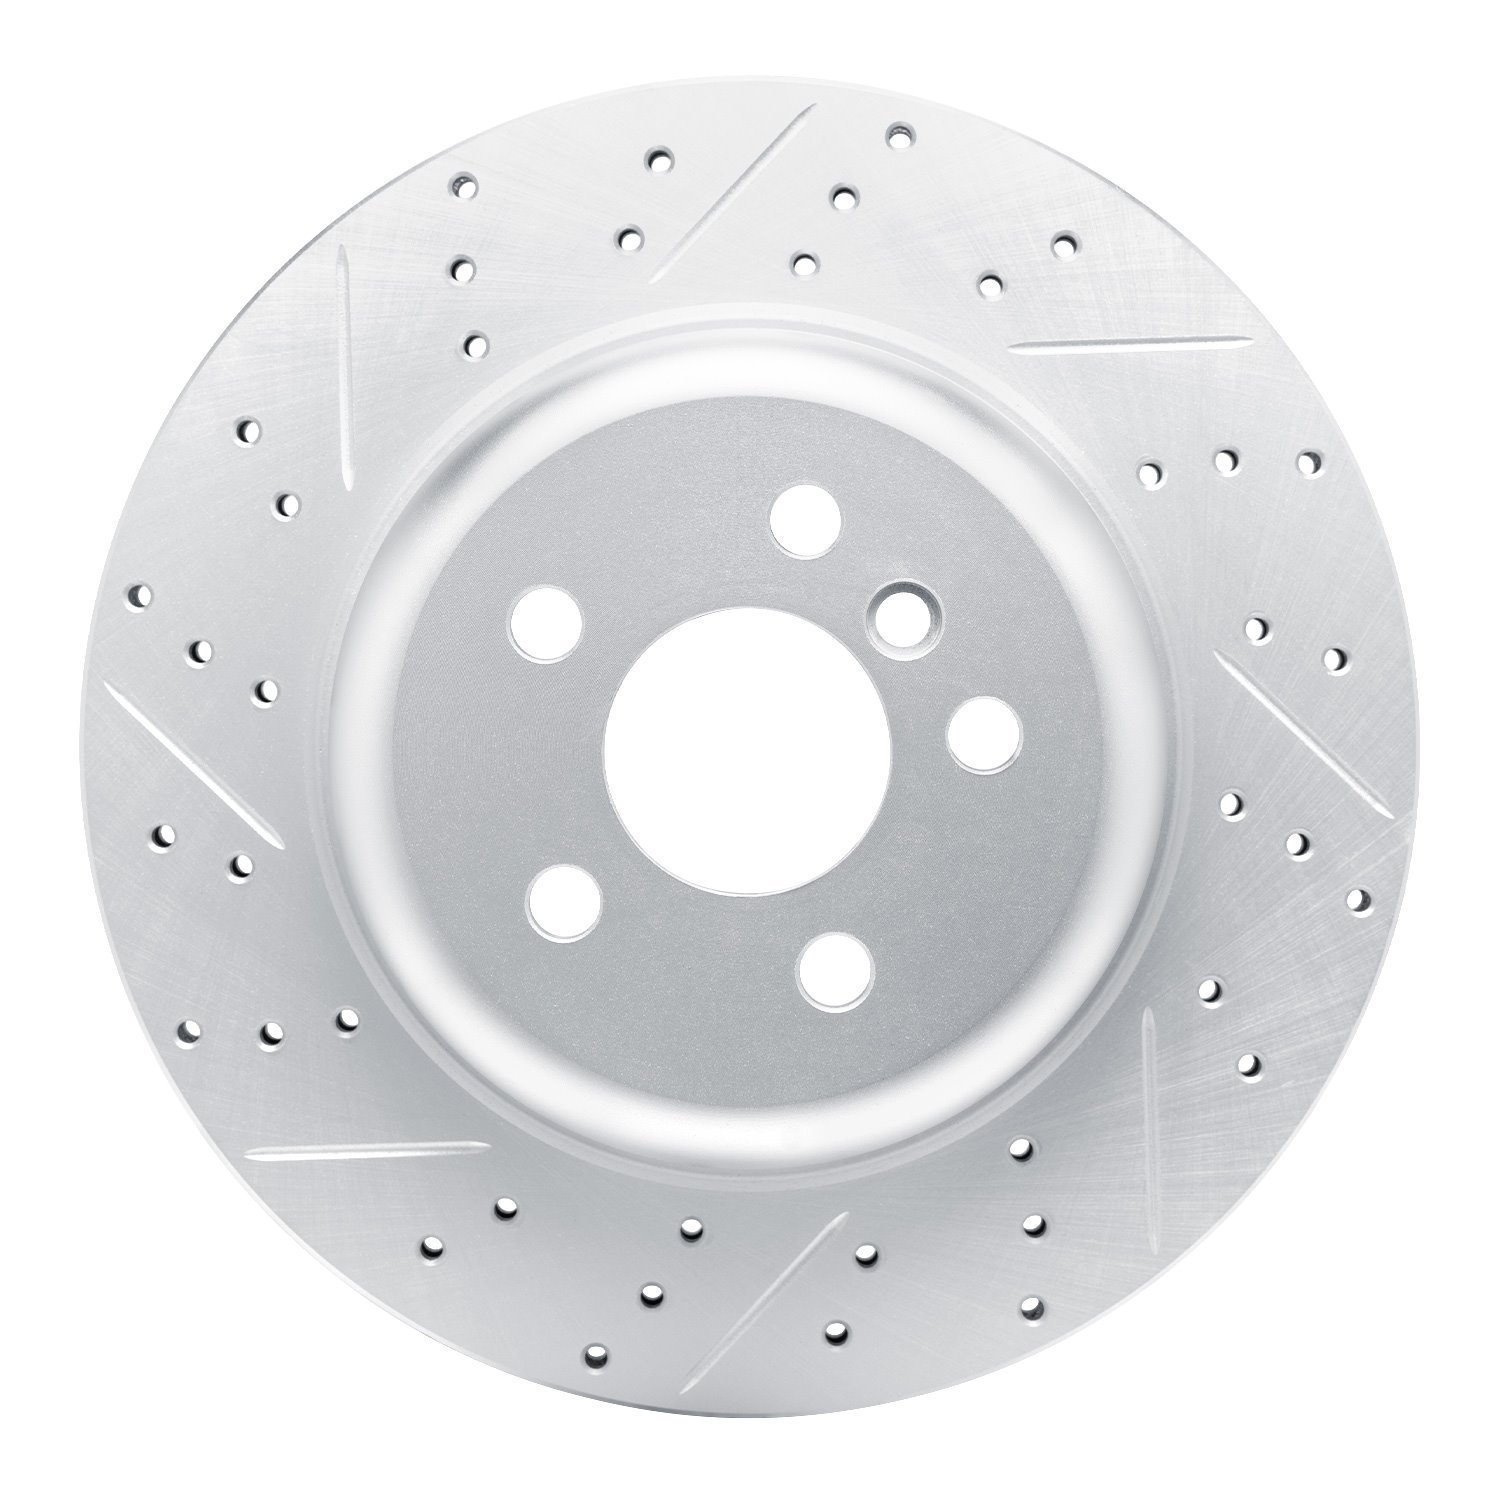 830-31169D Geoperformance Drilled/Slotted Brake Rotor, Fits Select Multiple Makes/Models, Position: Rear Right